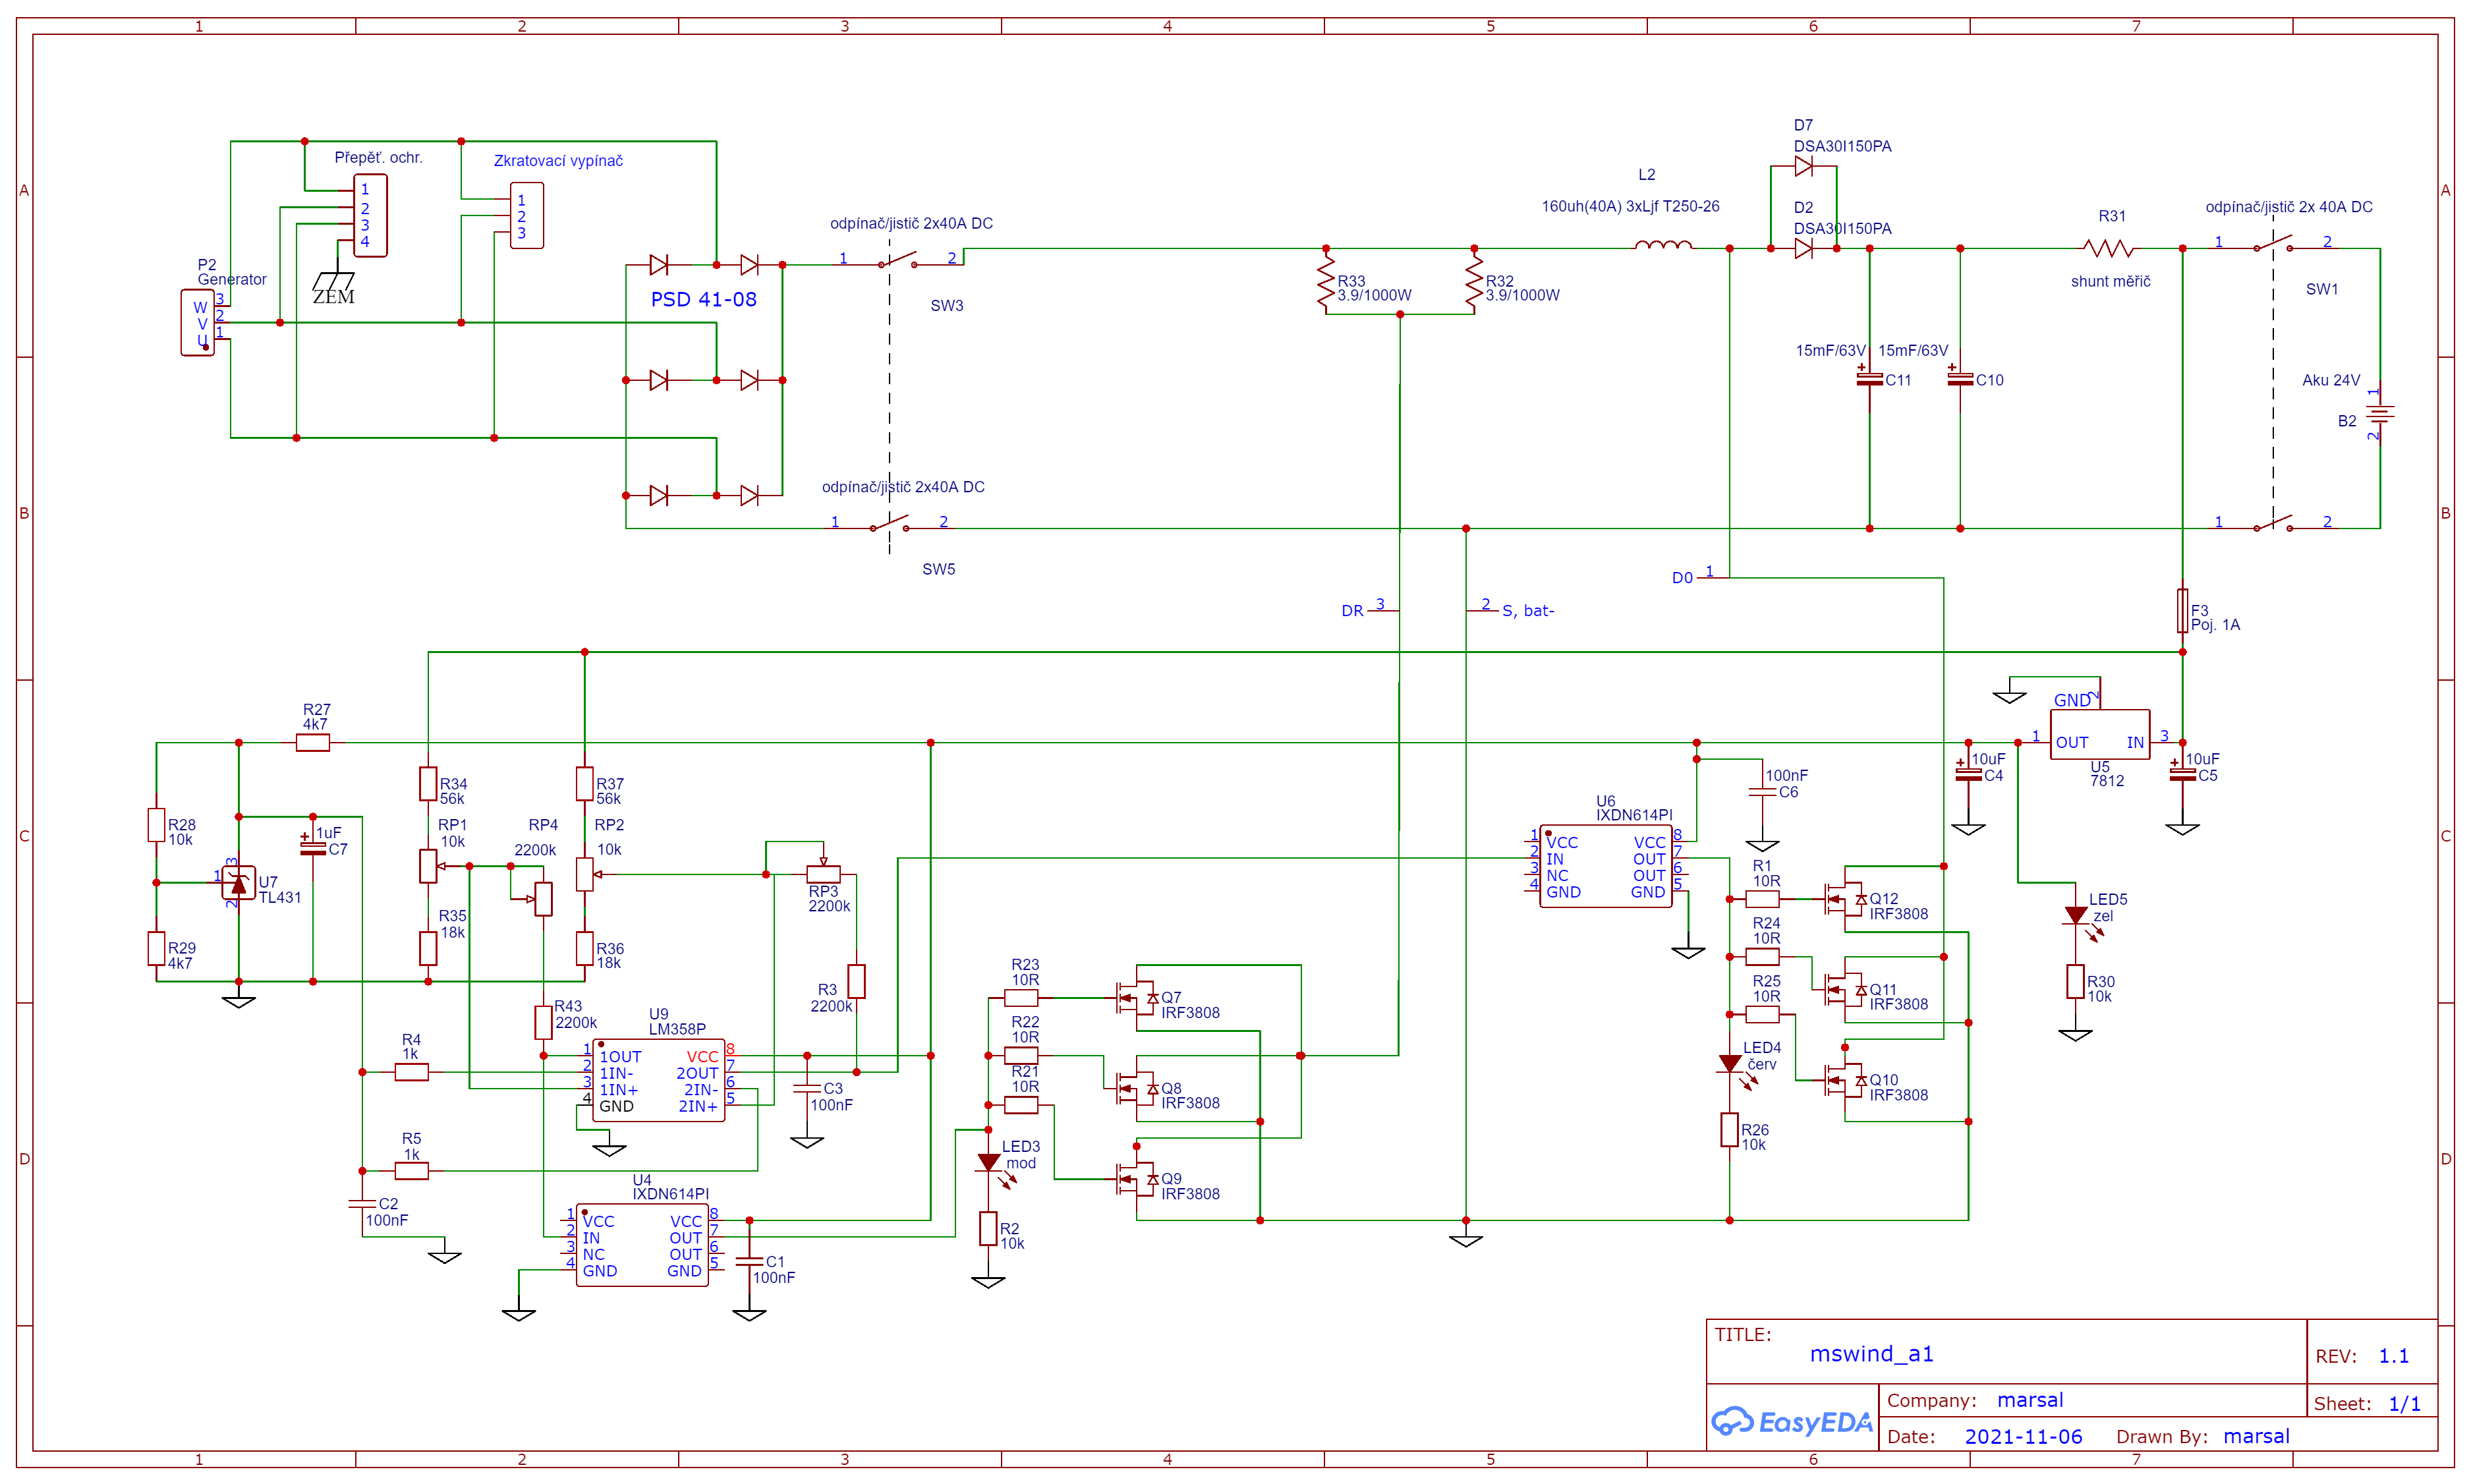 Schematic_mswind_a1_2021-11-09.png